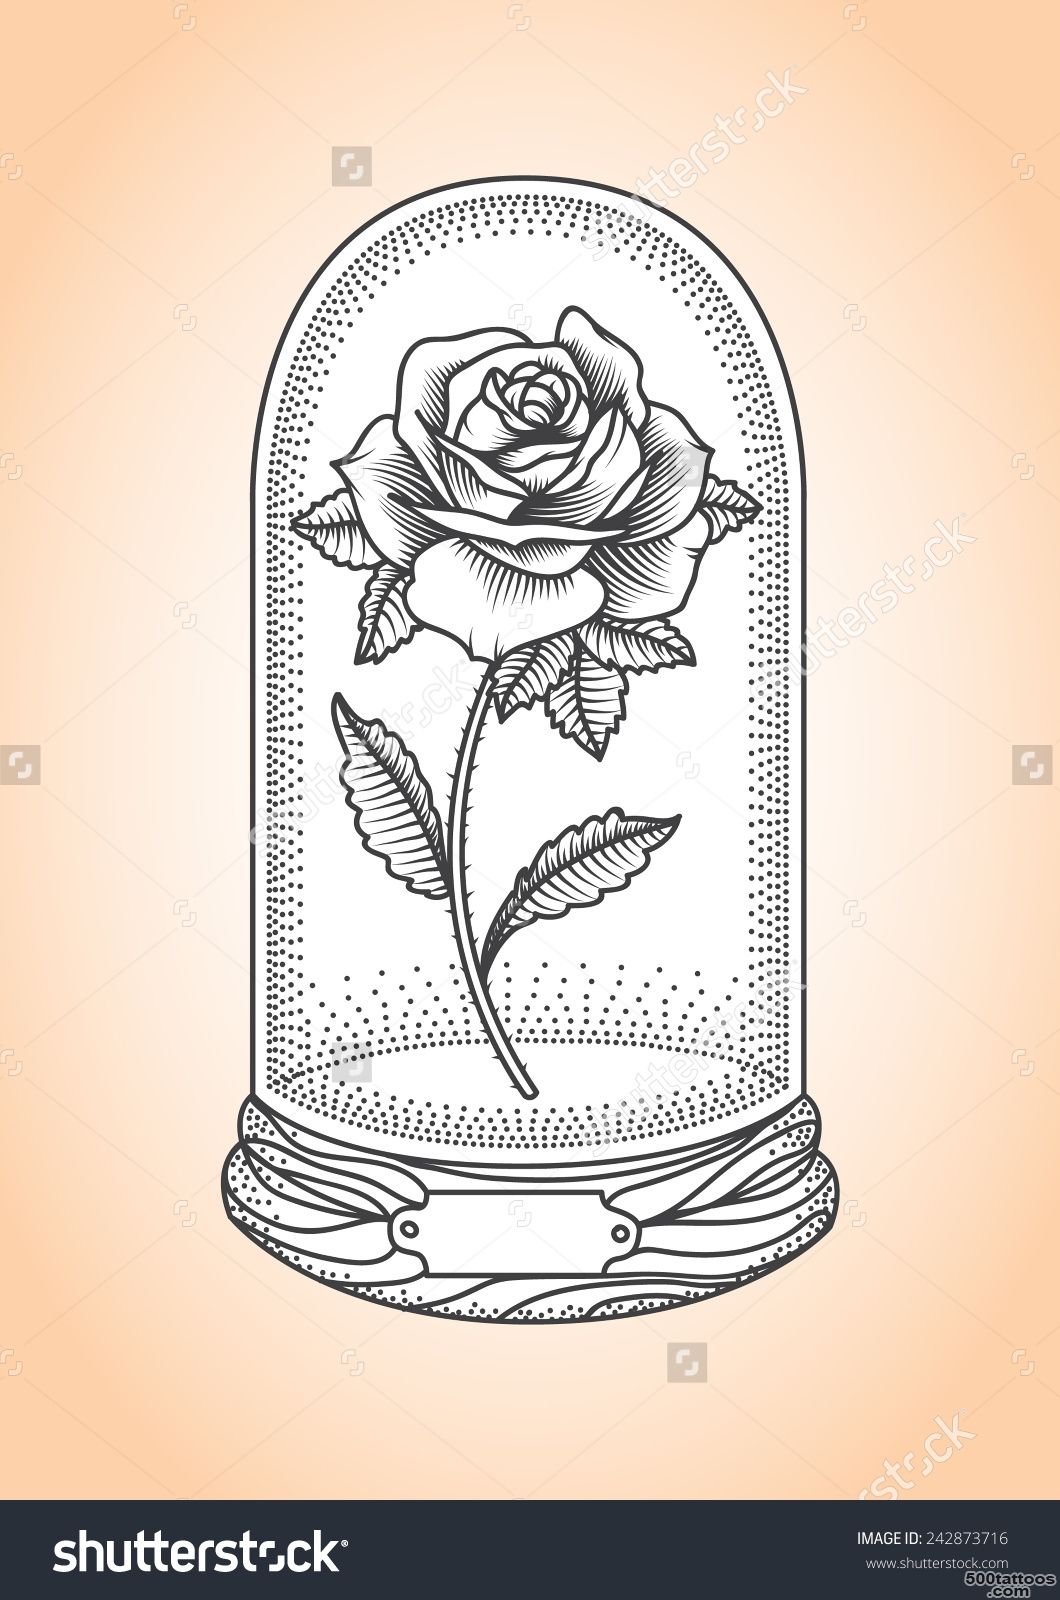 Rose Under A Glass Dome. Tattoo Style Drawing. Stock Vector ..._23